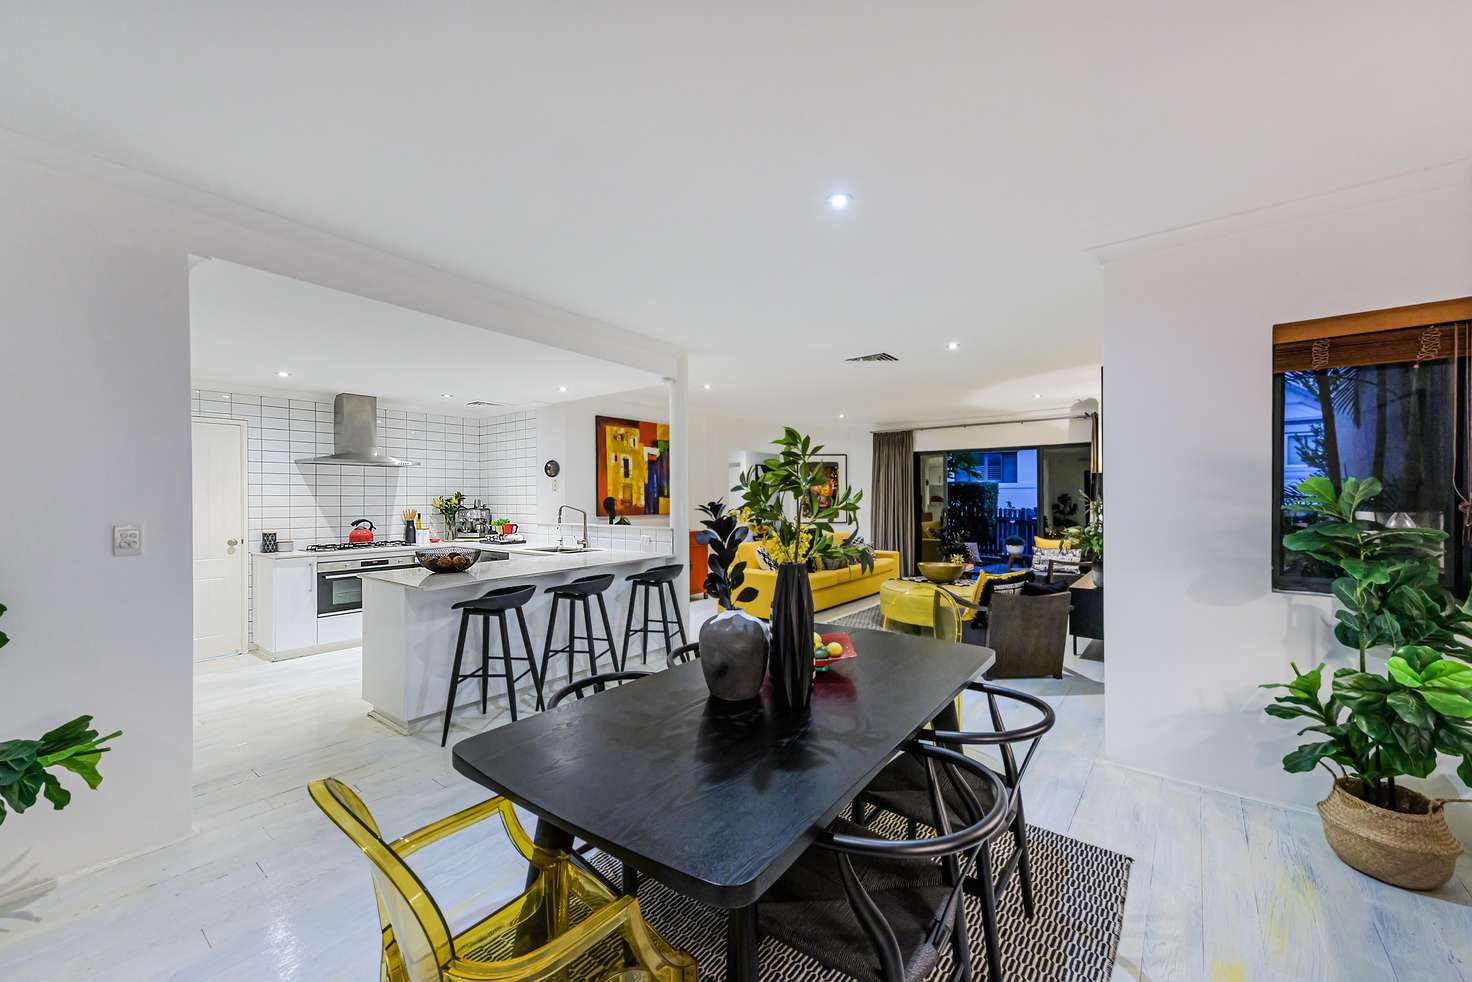 Main view of Homely house listing, 3 Toorak Rise, North Perth WA 6006